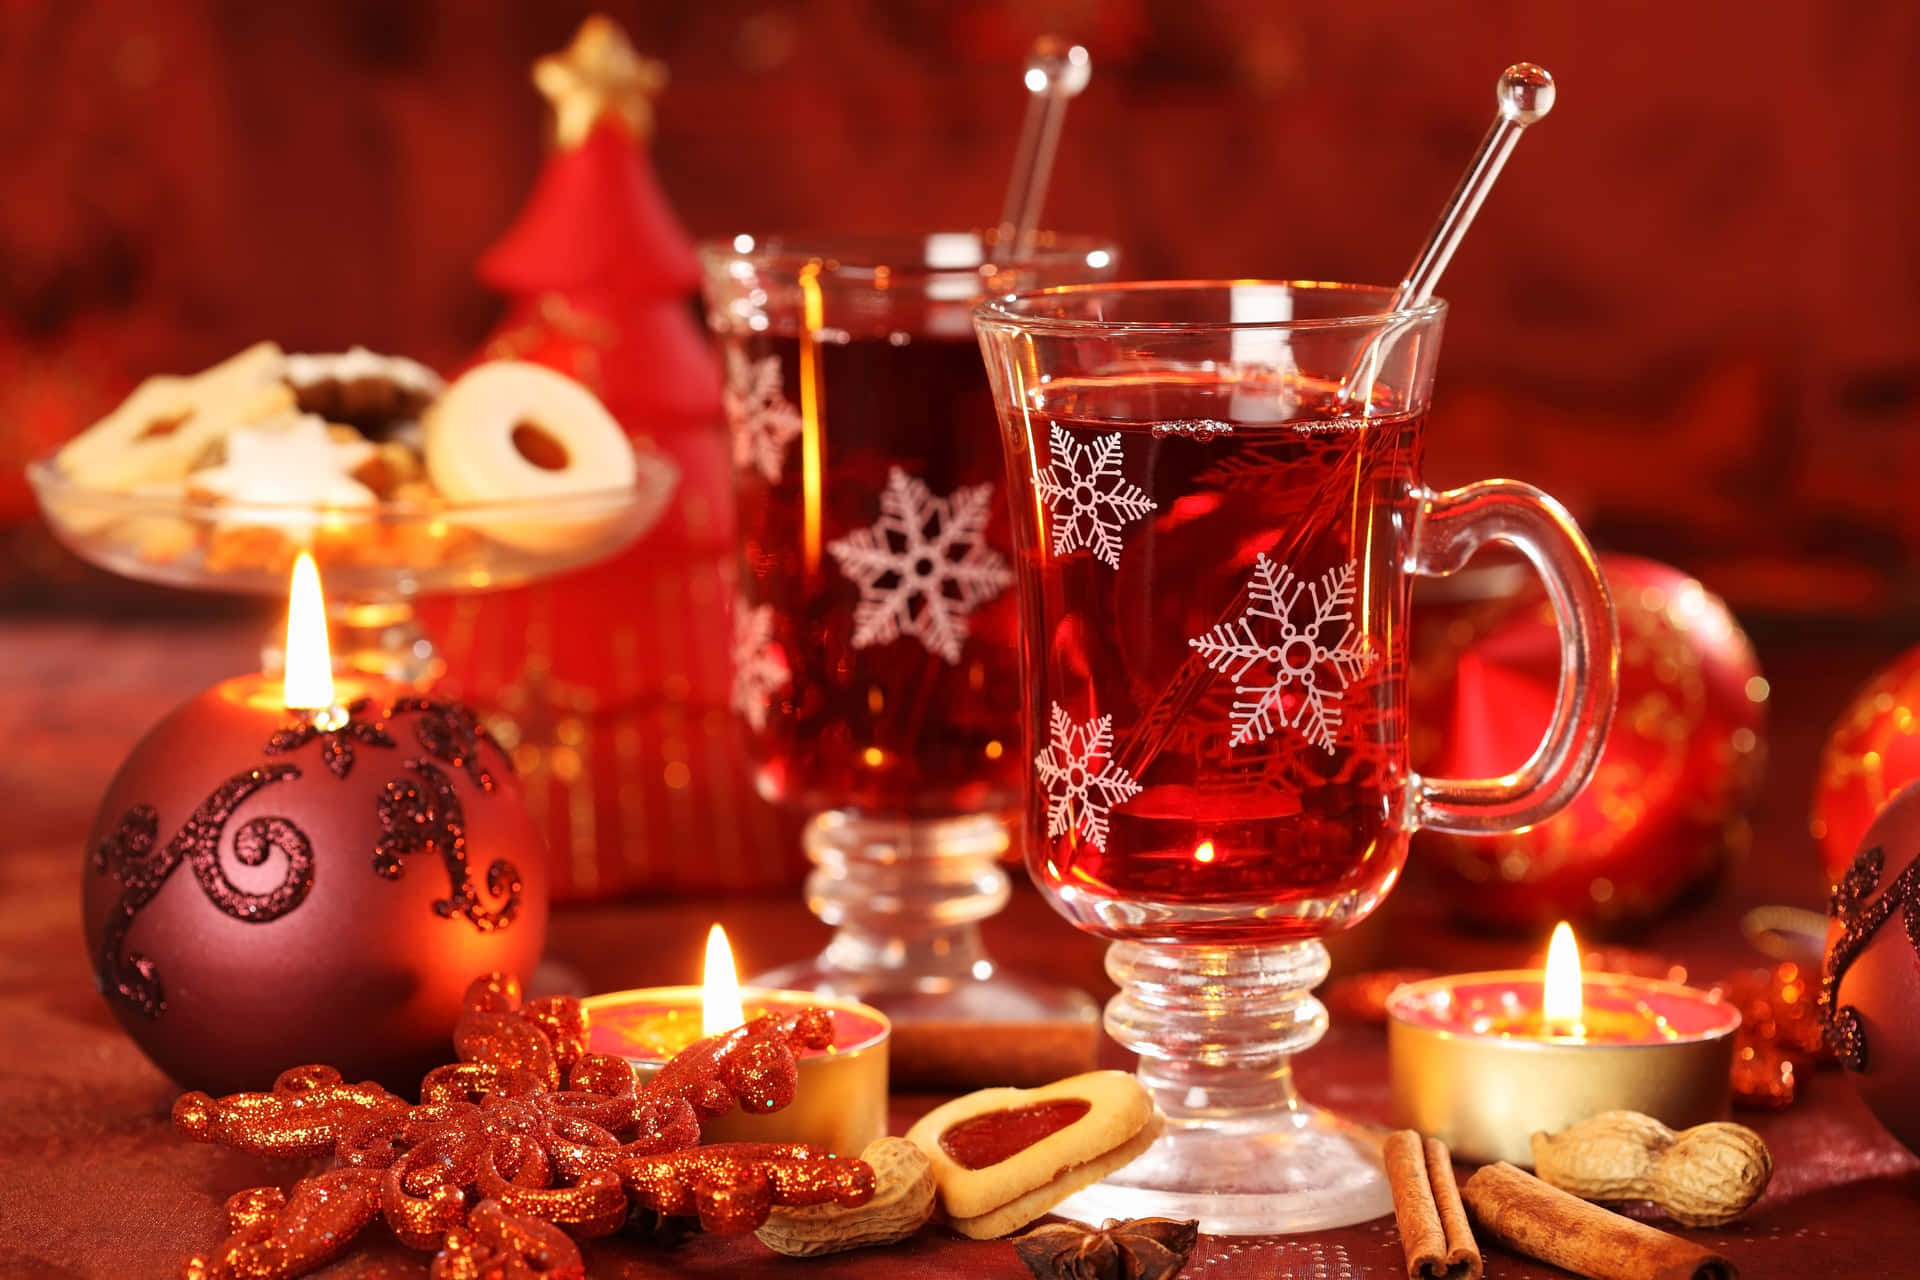 Caption: A Warm and Inviting Glass of Mulled Wine Wallpaper